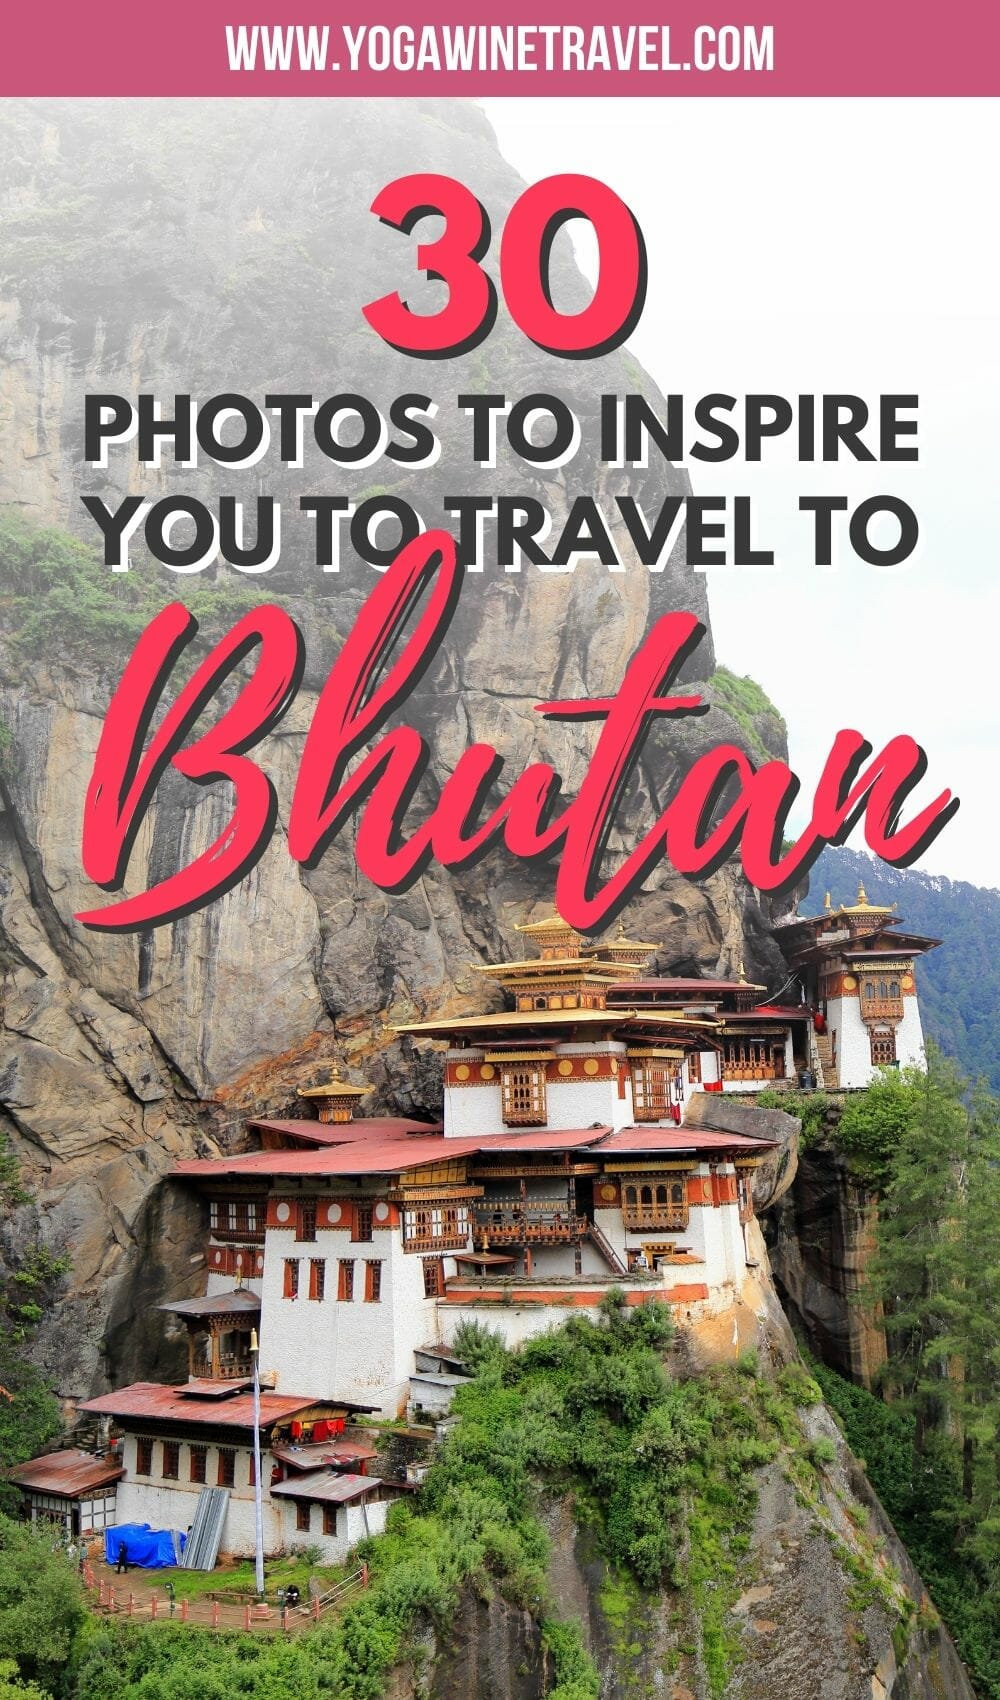 Tigers Nest in Bhutan with text overlay